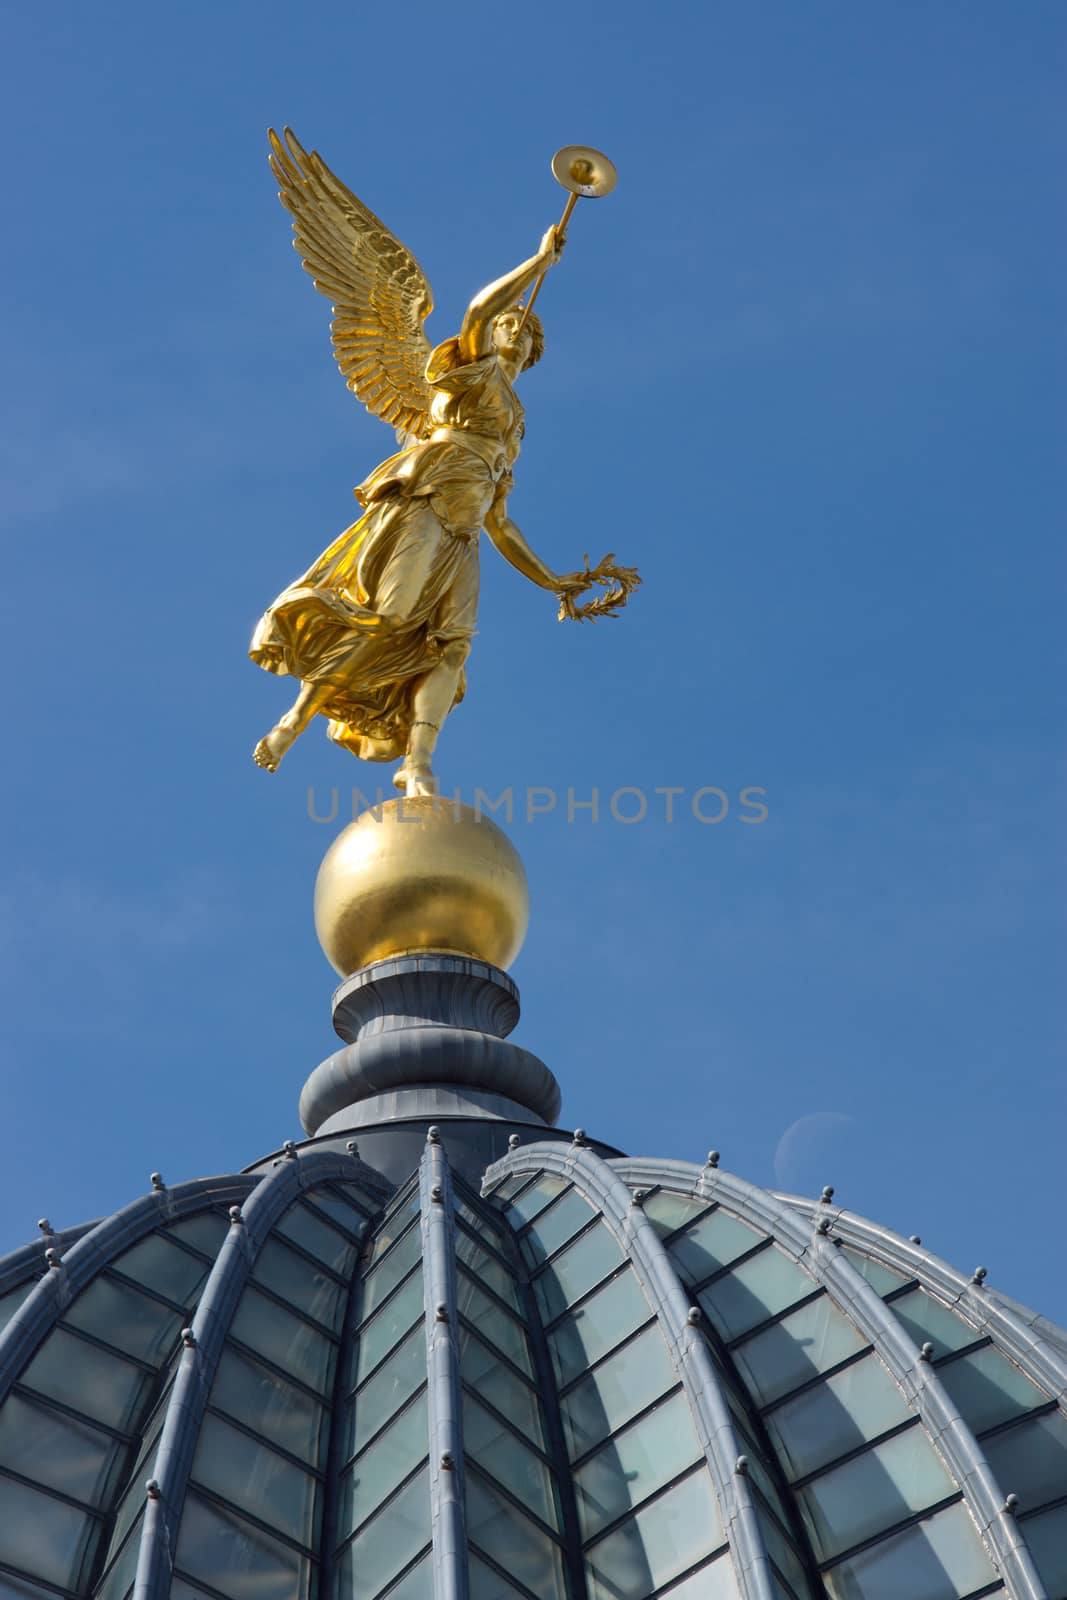 The golden angel on the cuppola of the University of arts in Dresden